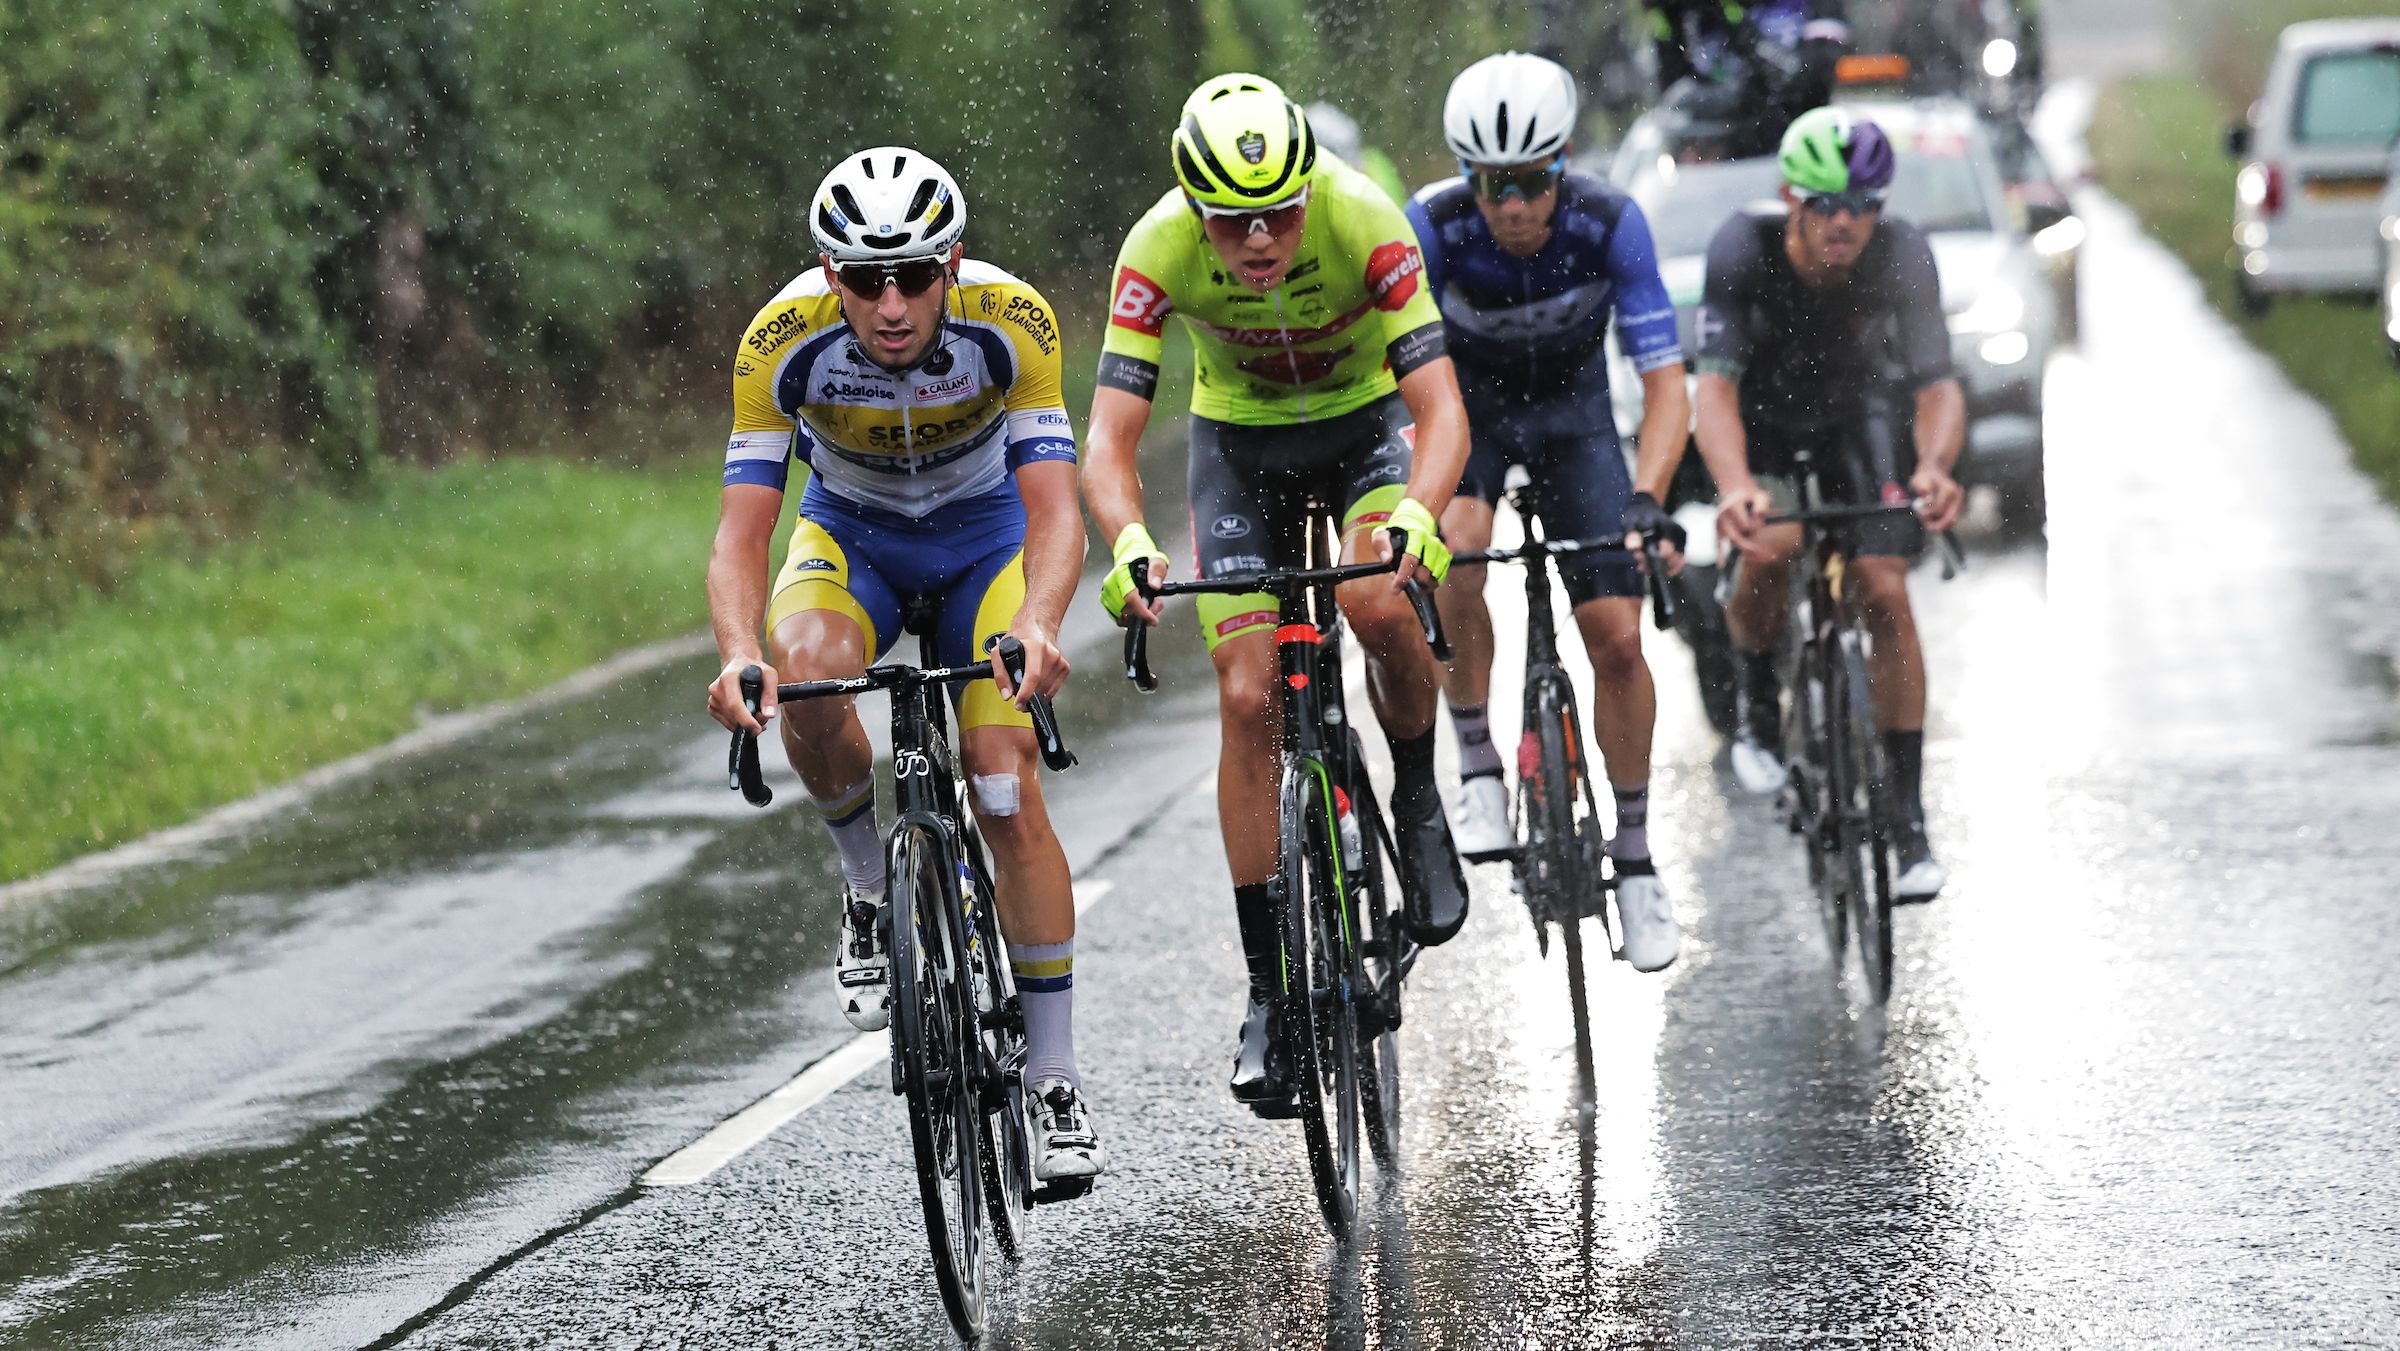 Dorset stage of Tour of Britain cycle race cancelled | GHR Dorset